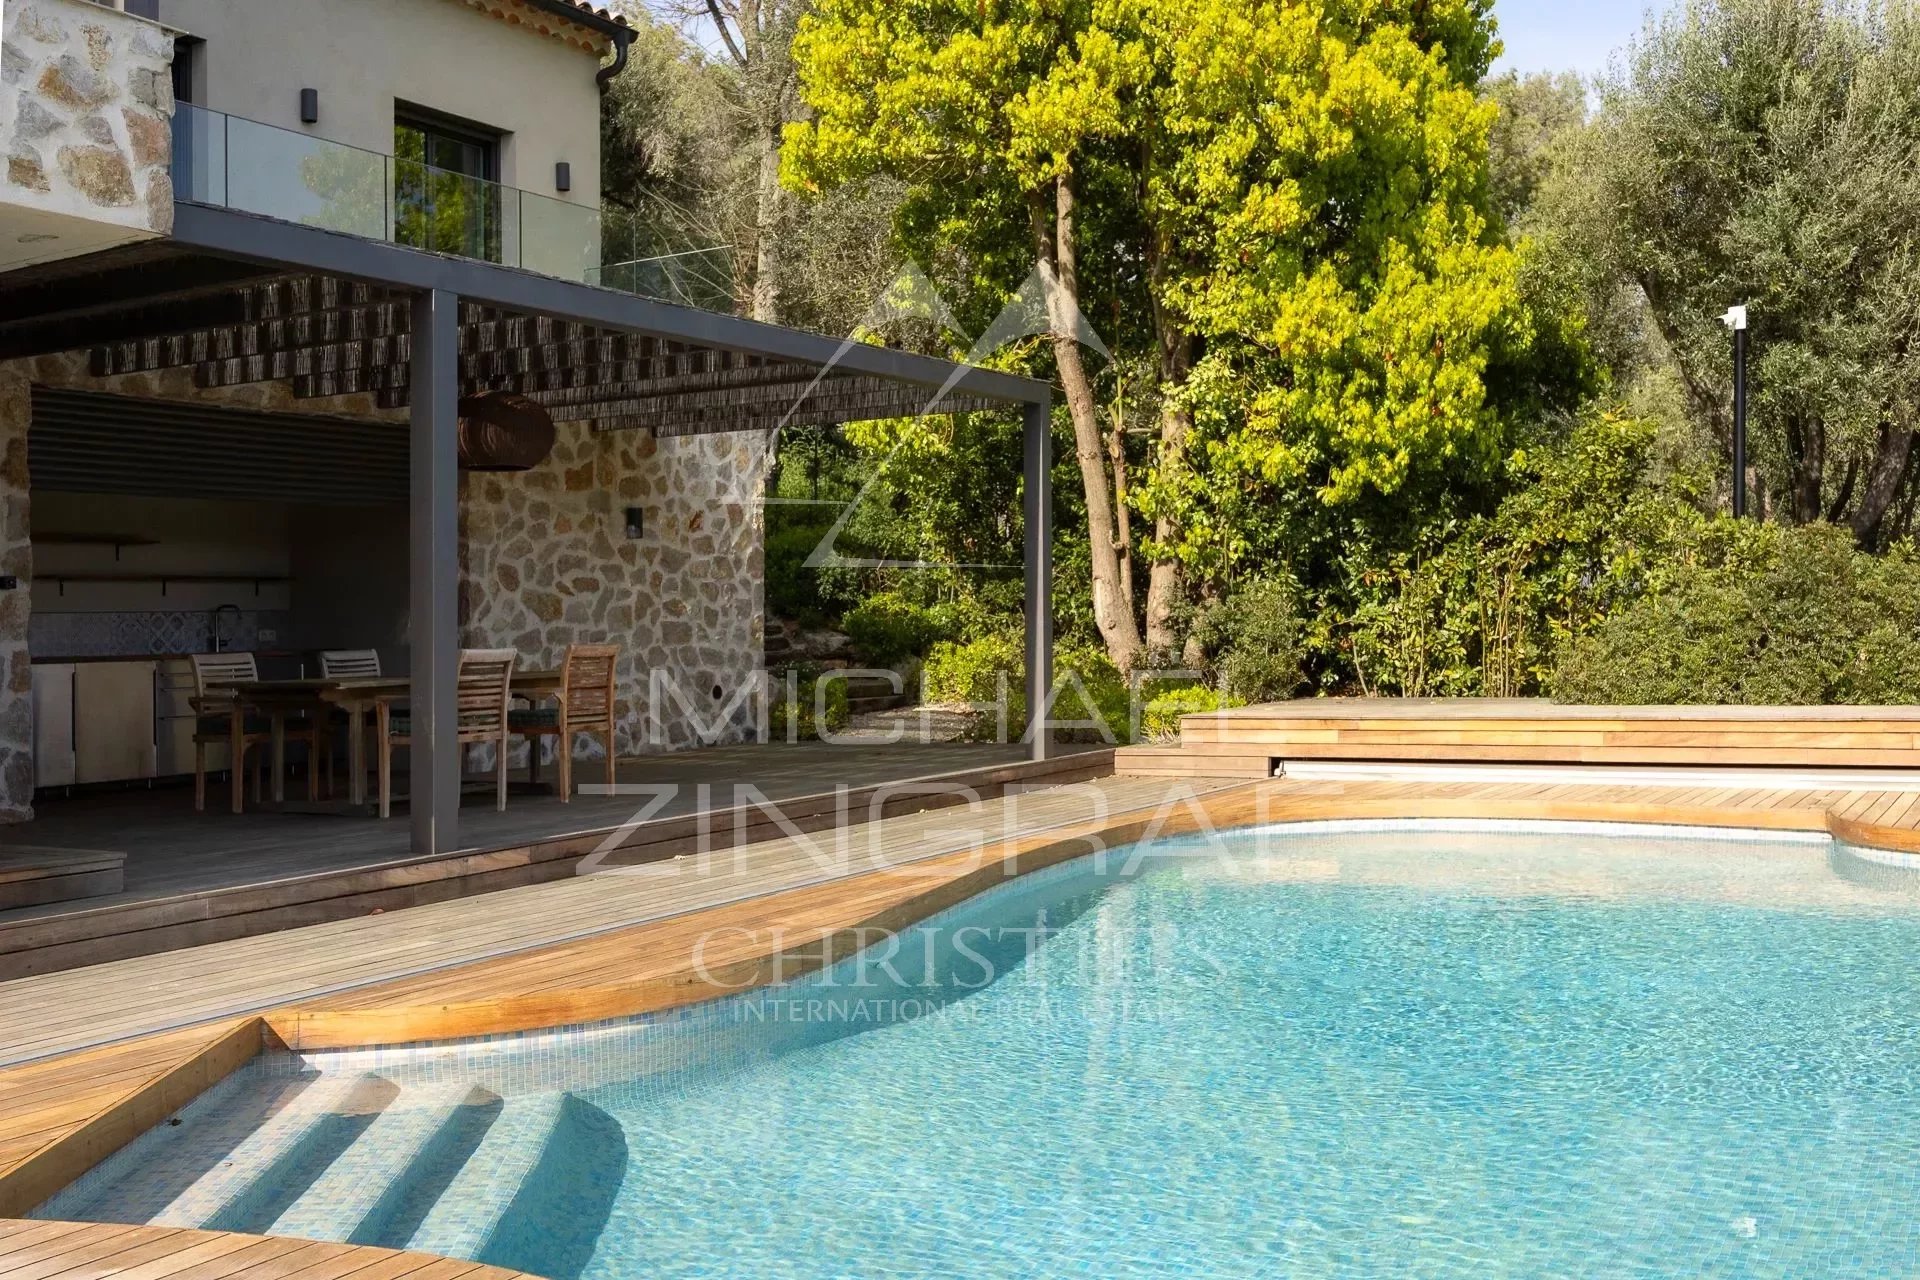 Valbonne - Walking distance from the old village - 6 bedrooms - Partial sea view